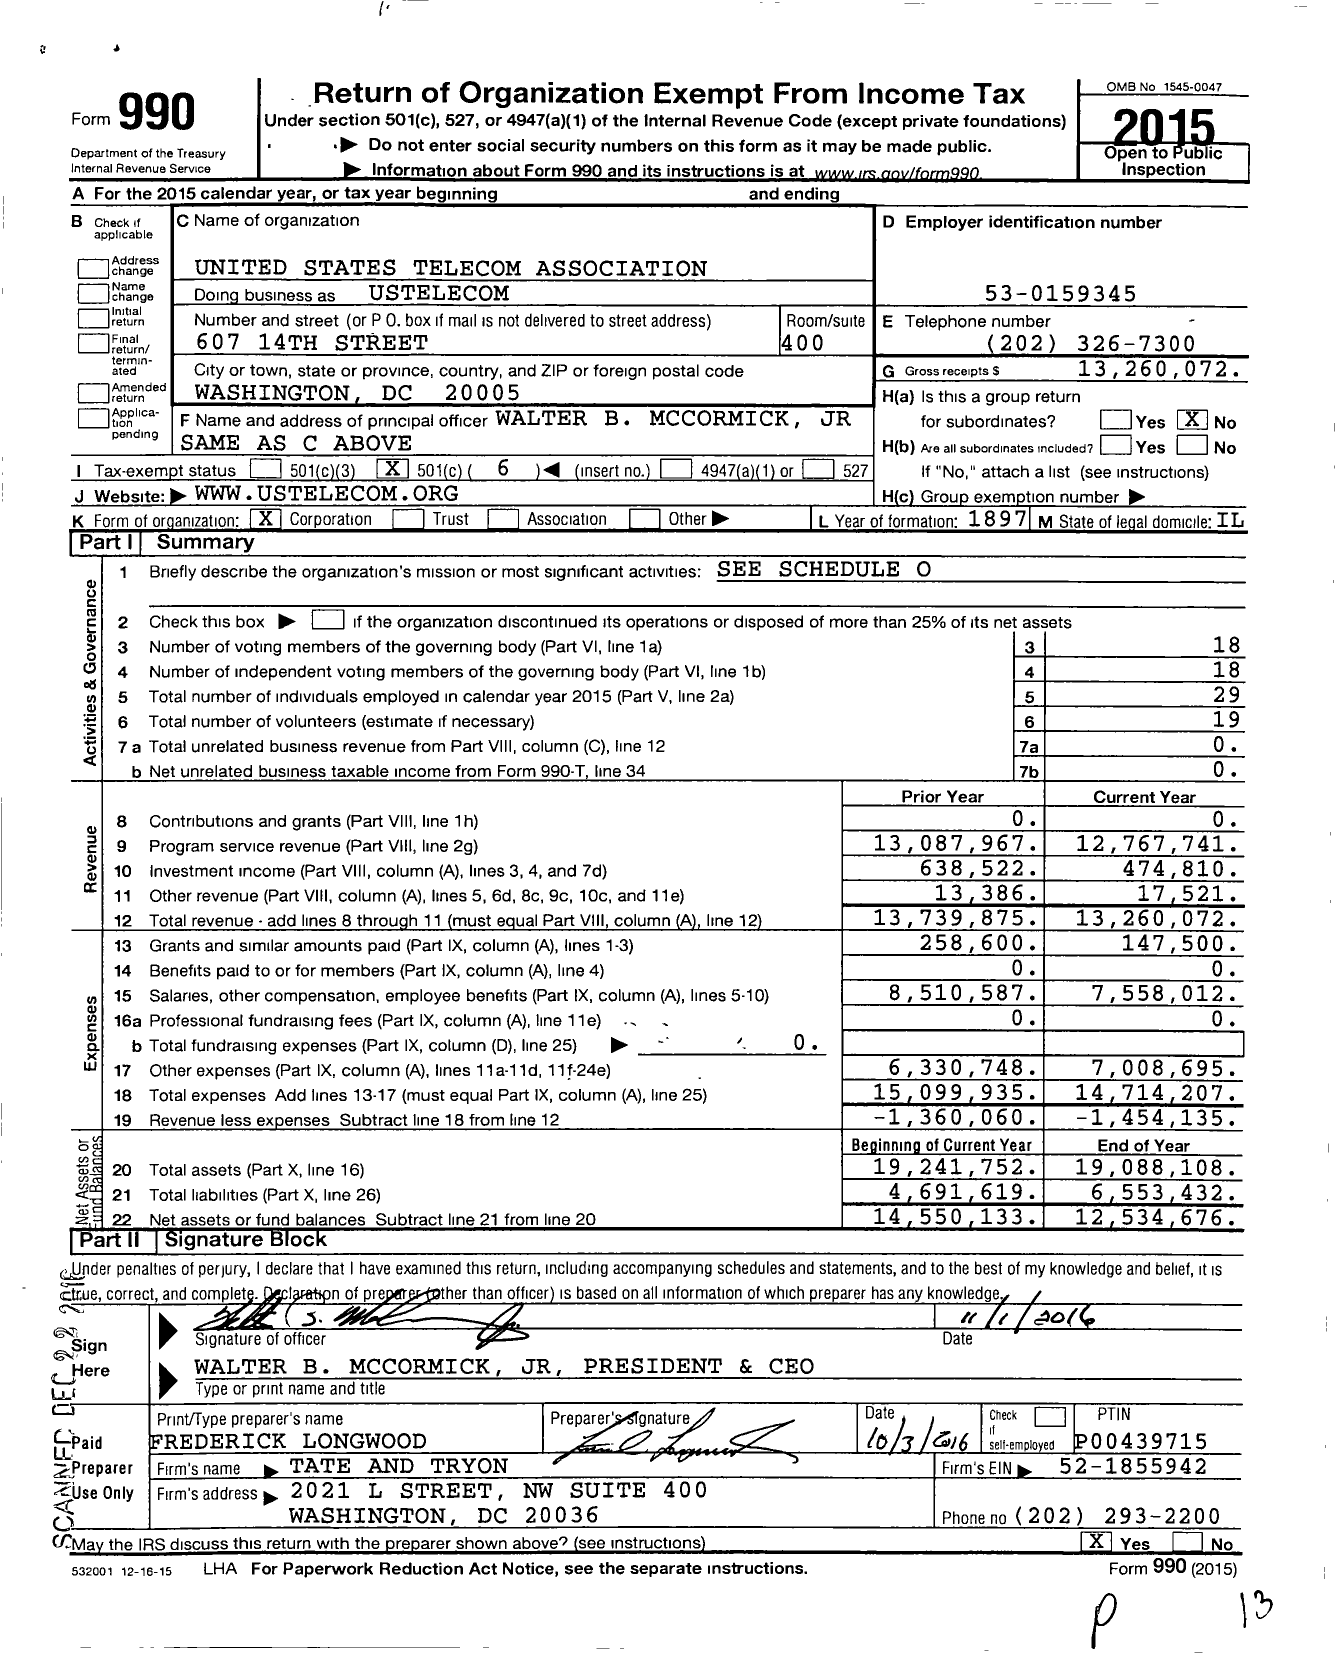 Image of first page of 2015 Form 990O for United States Telecom Association (USTelecom)